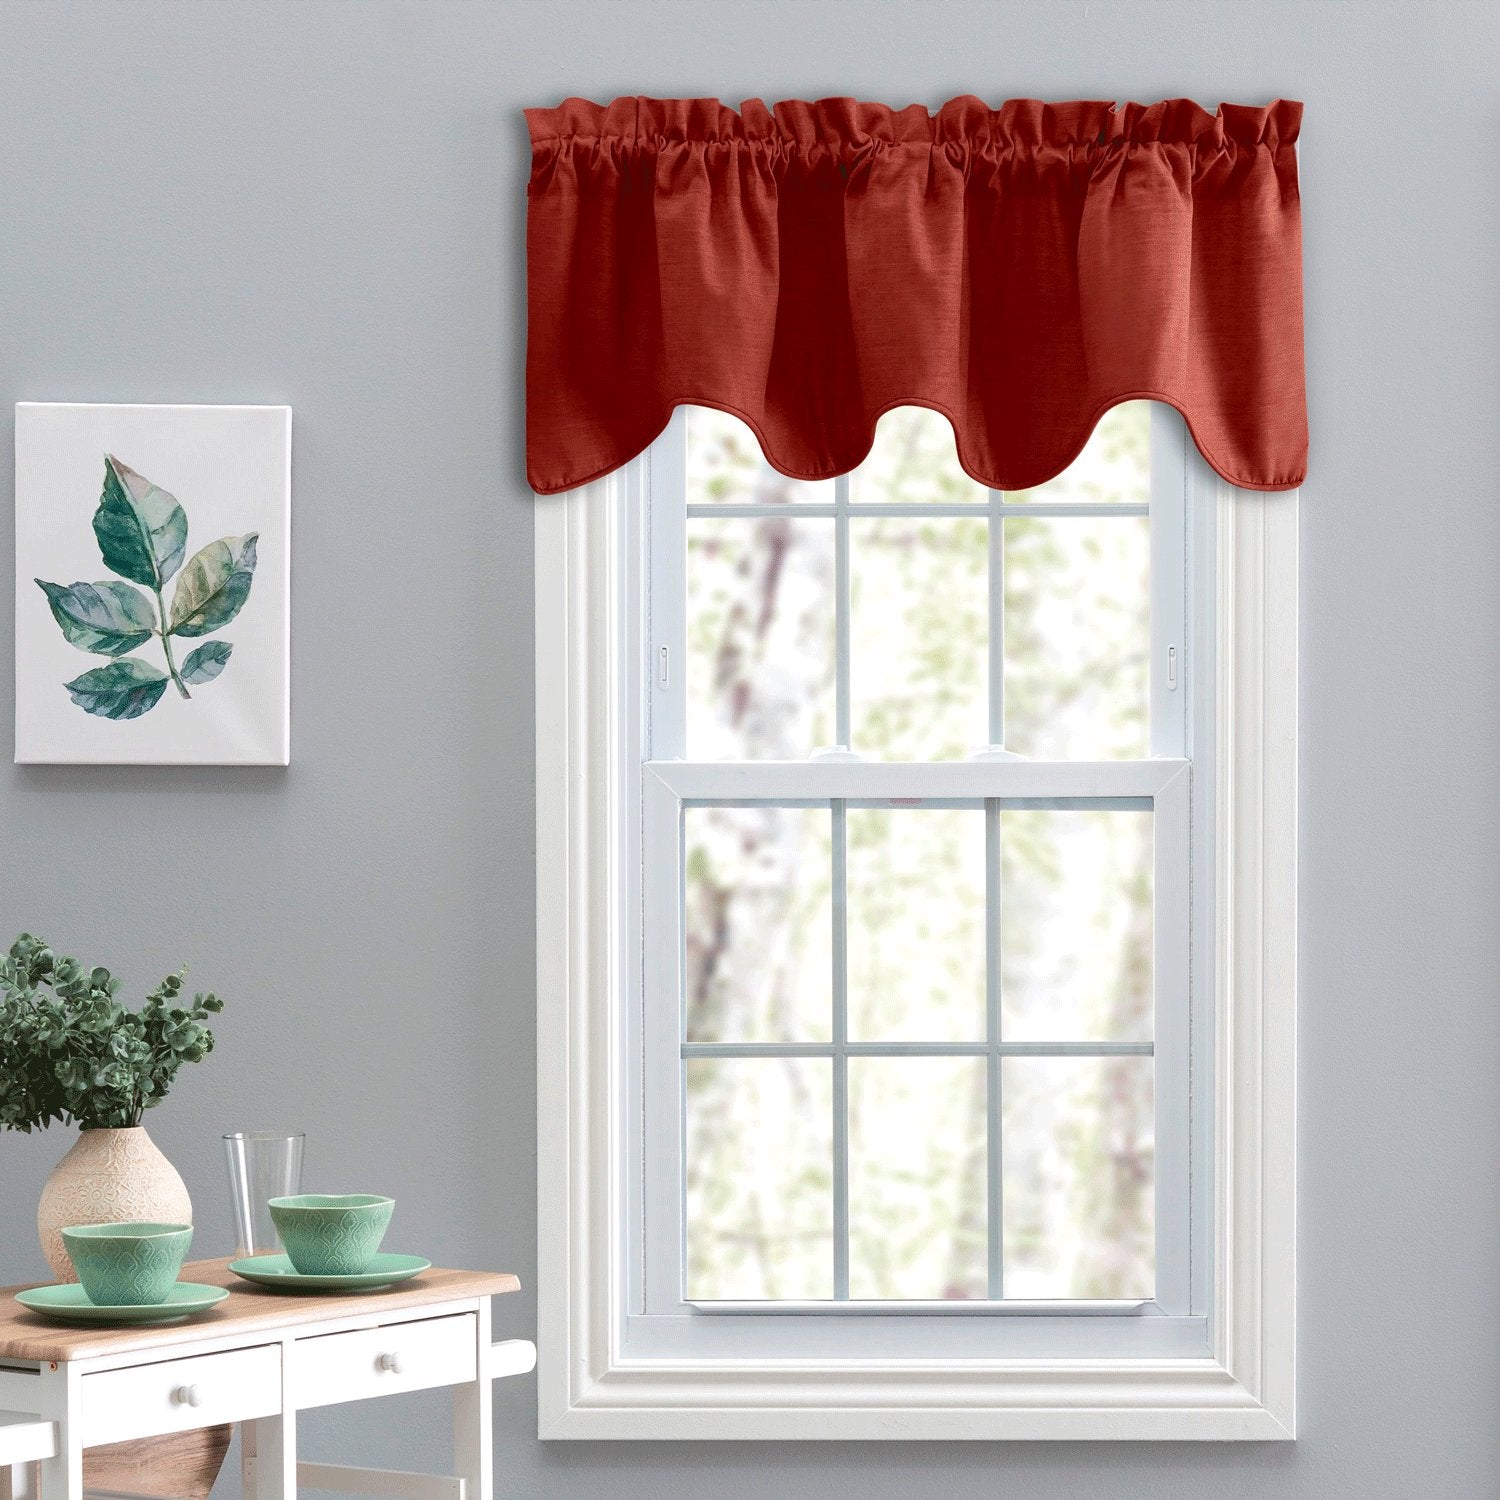 How To Hang Valances